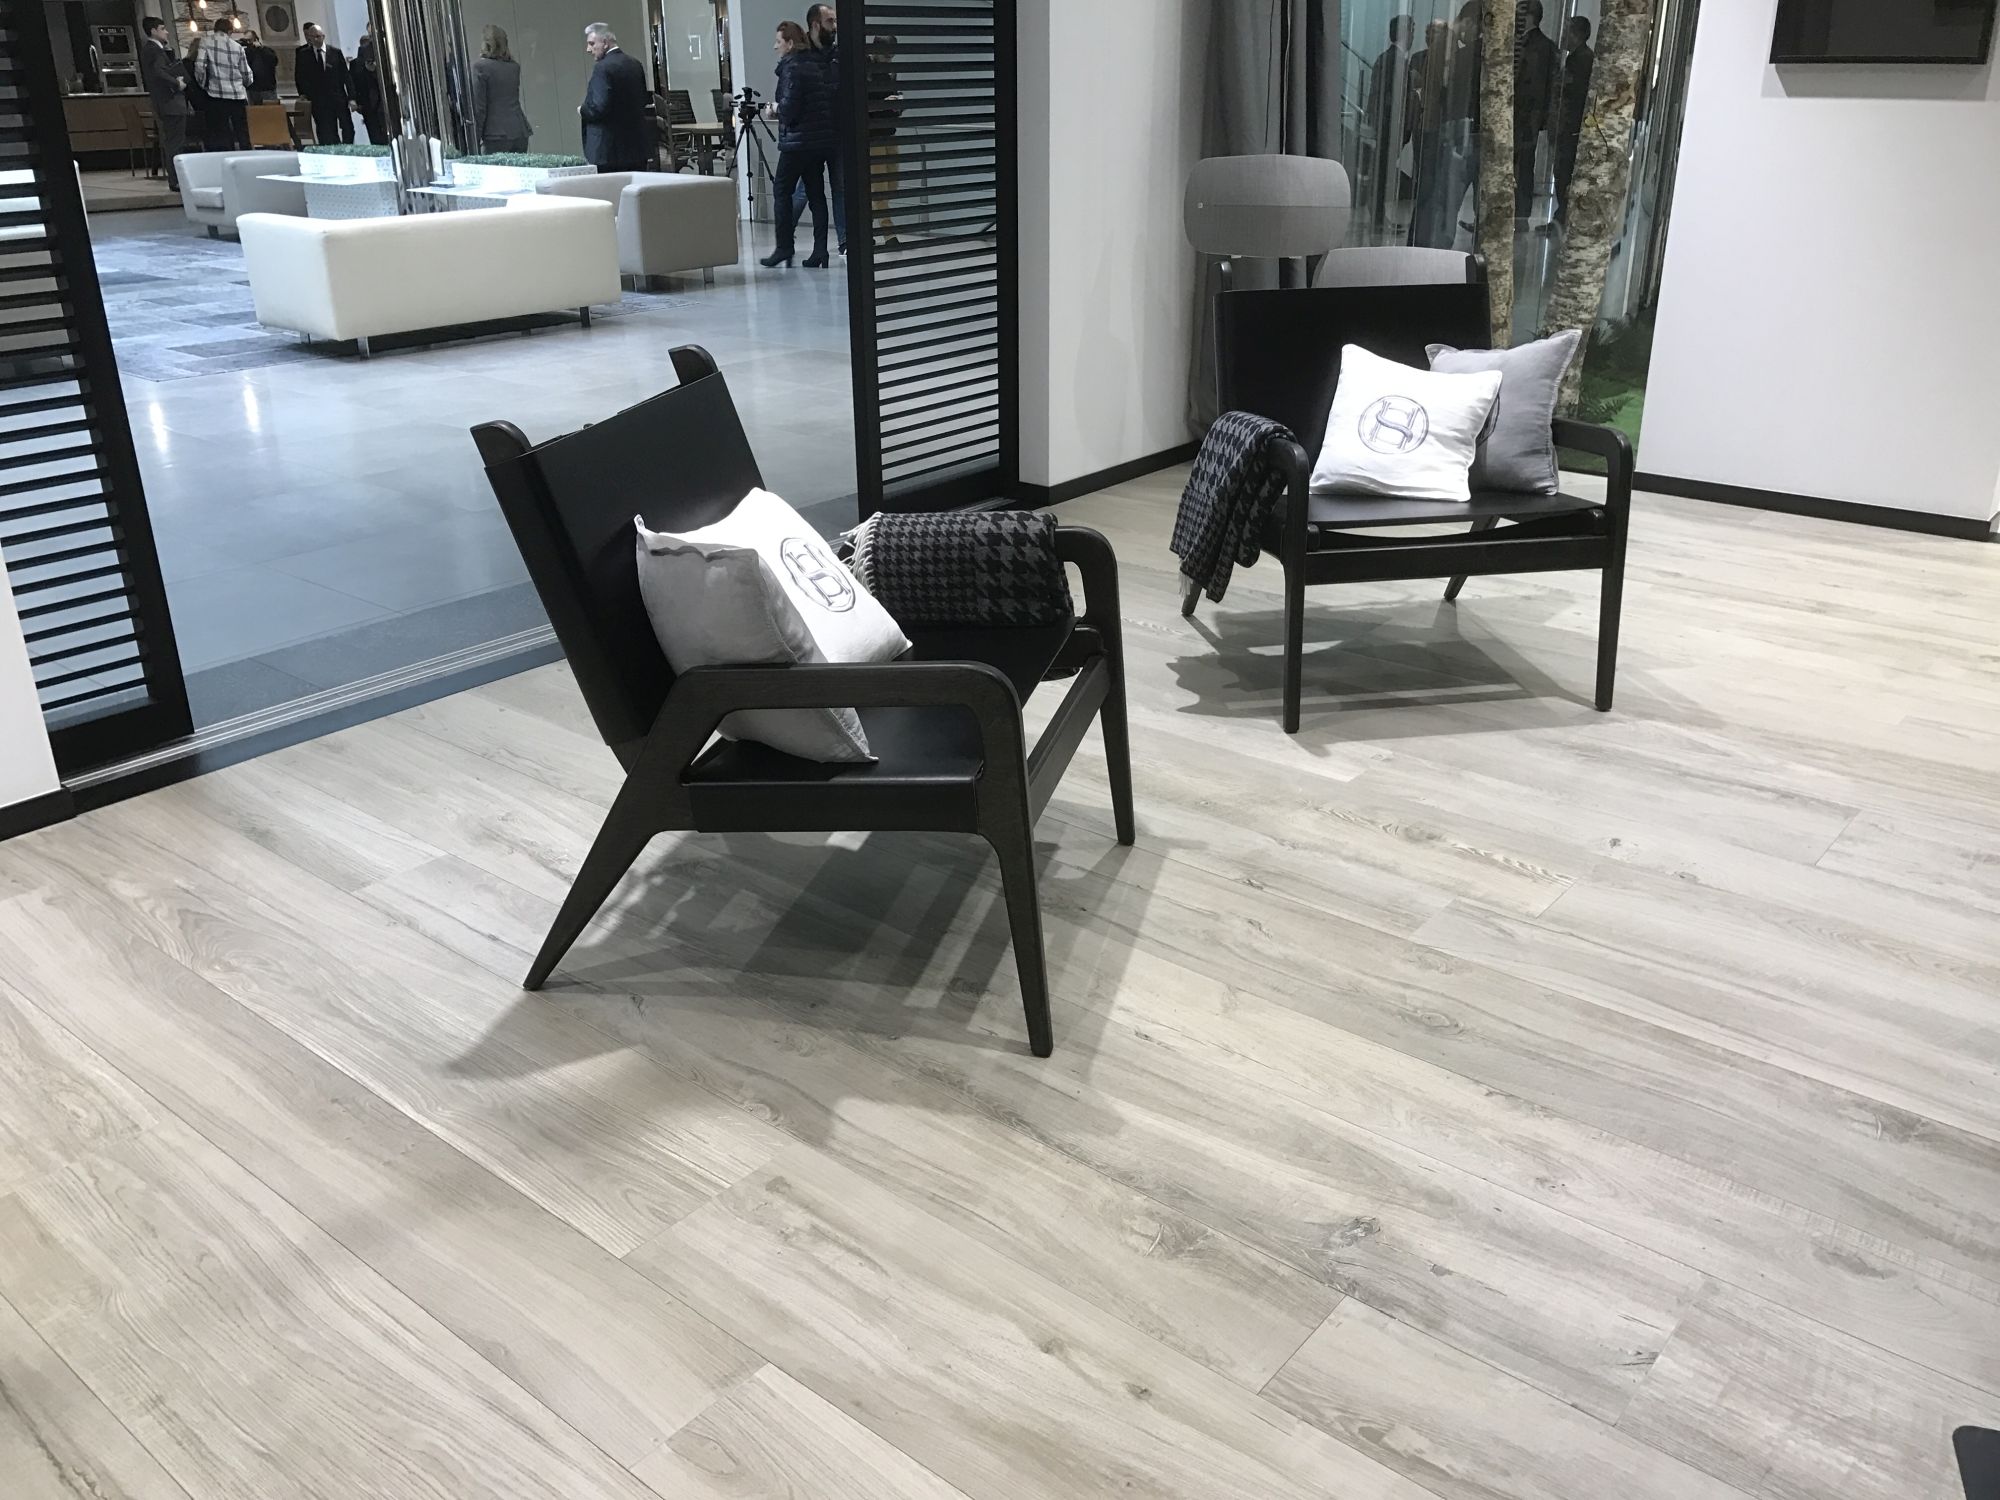 Relaxing black chairs over contrasting wood inspired floor tiles by Porcelanosa